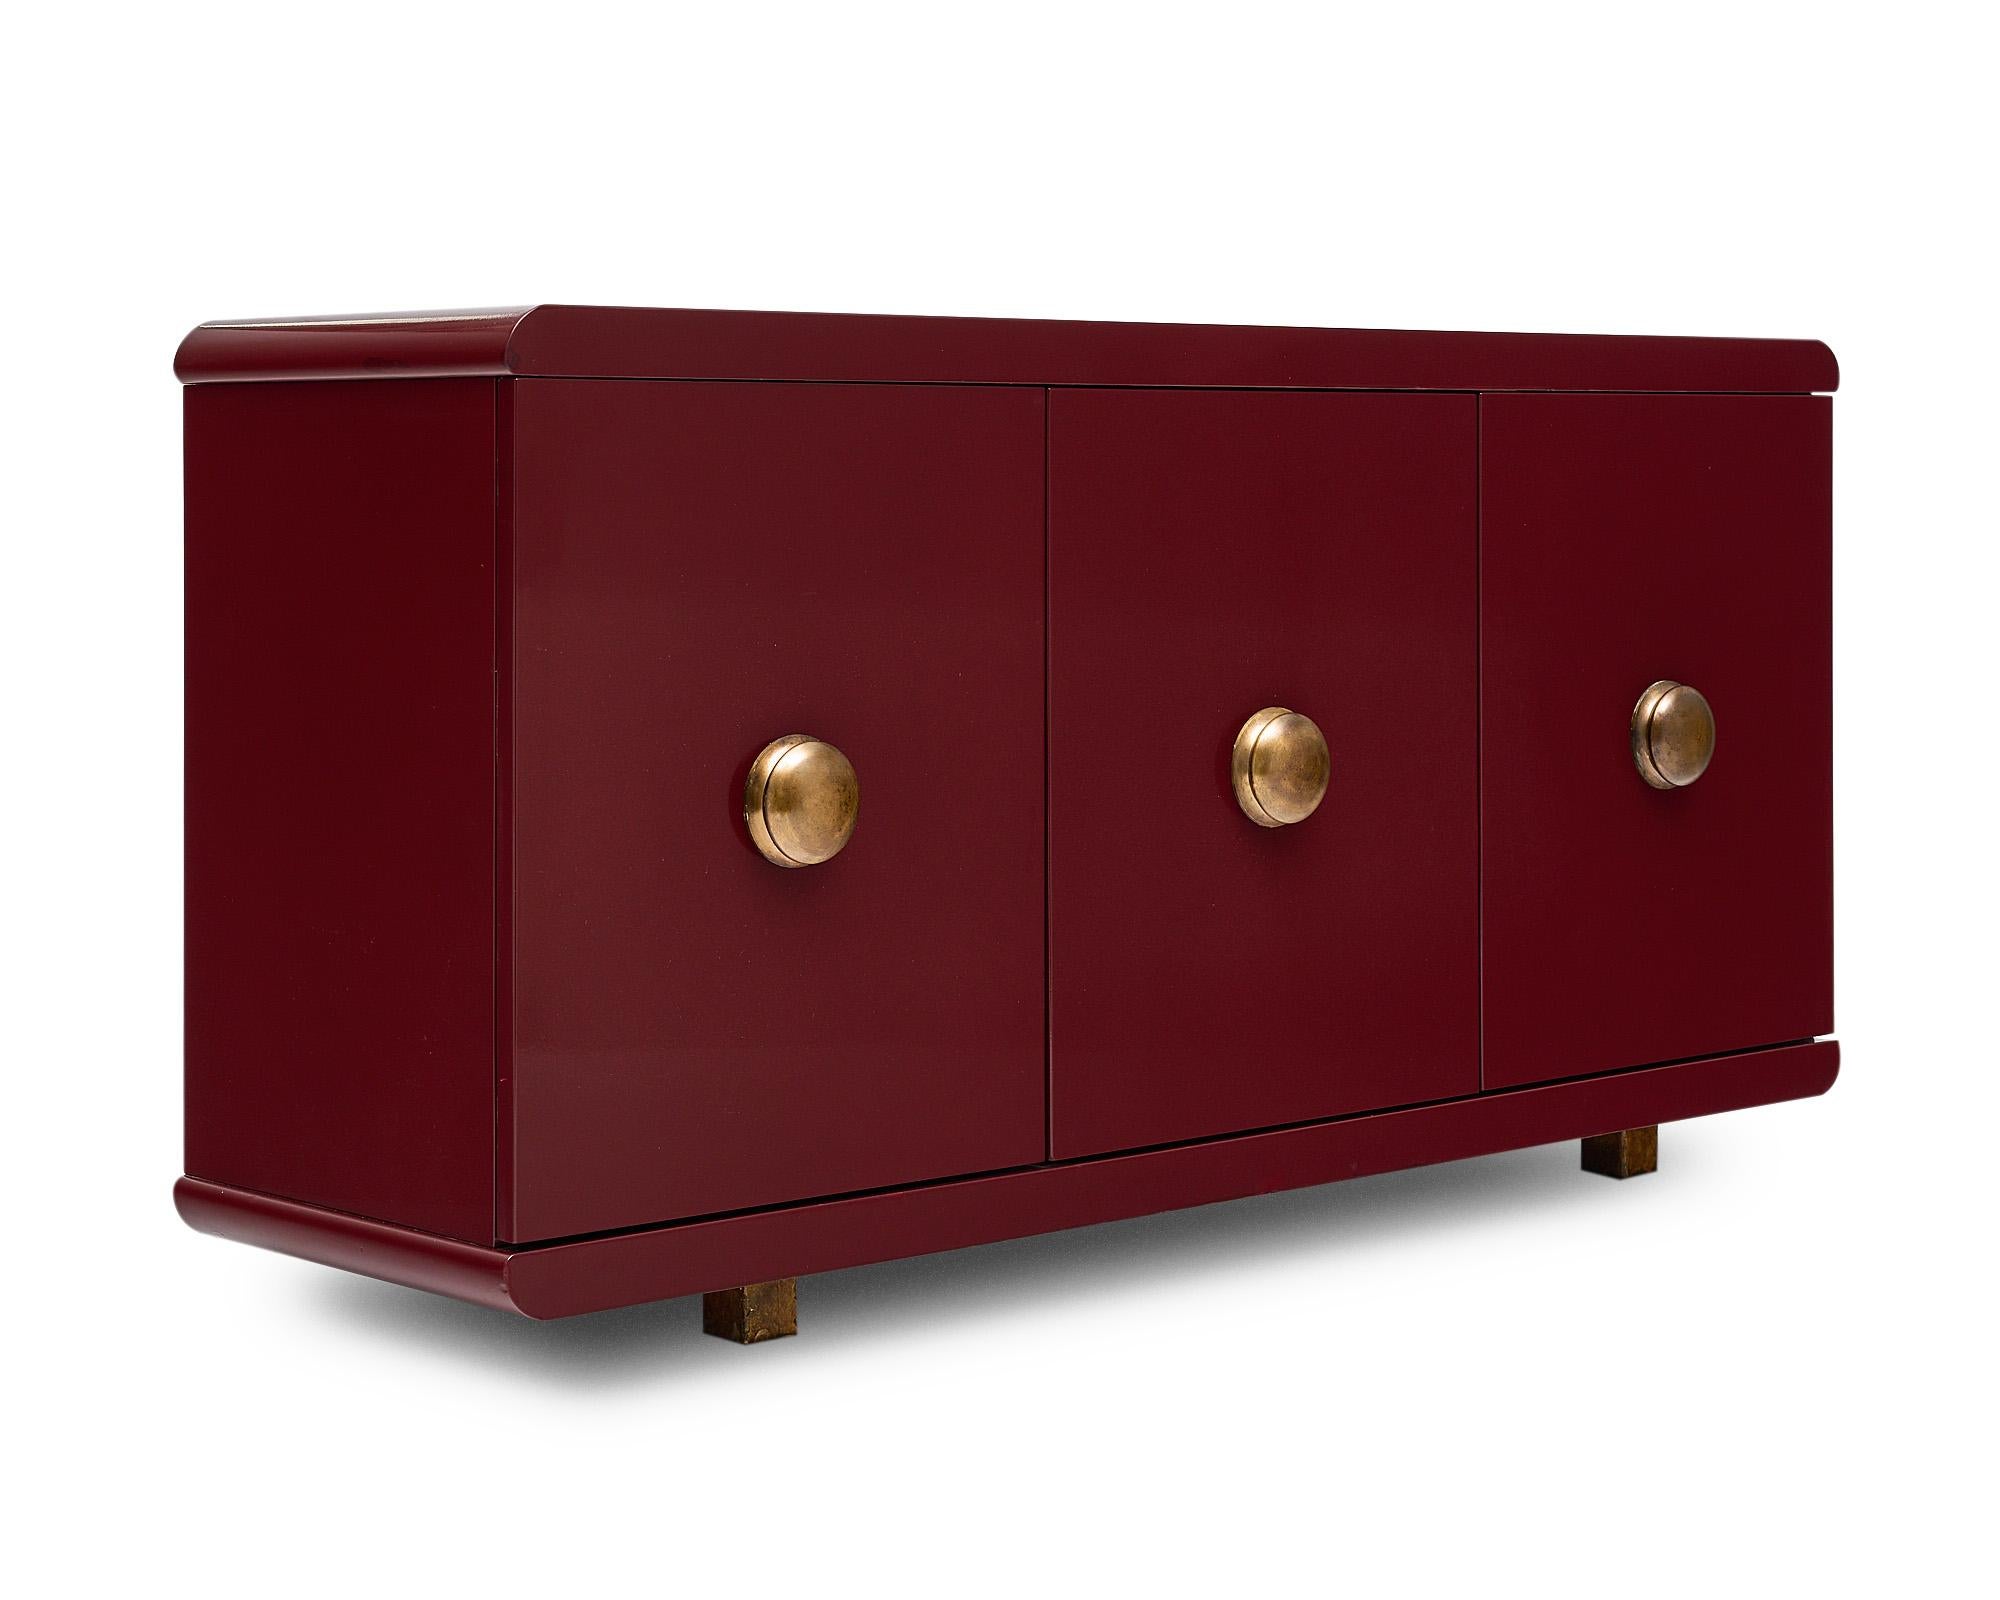 Mid-Century Modern buffet, Italian, that is lacquered with a lovely burgundy tone. There are three doors that open to an interior shelf. Each door features brass hardware.